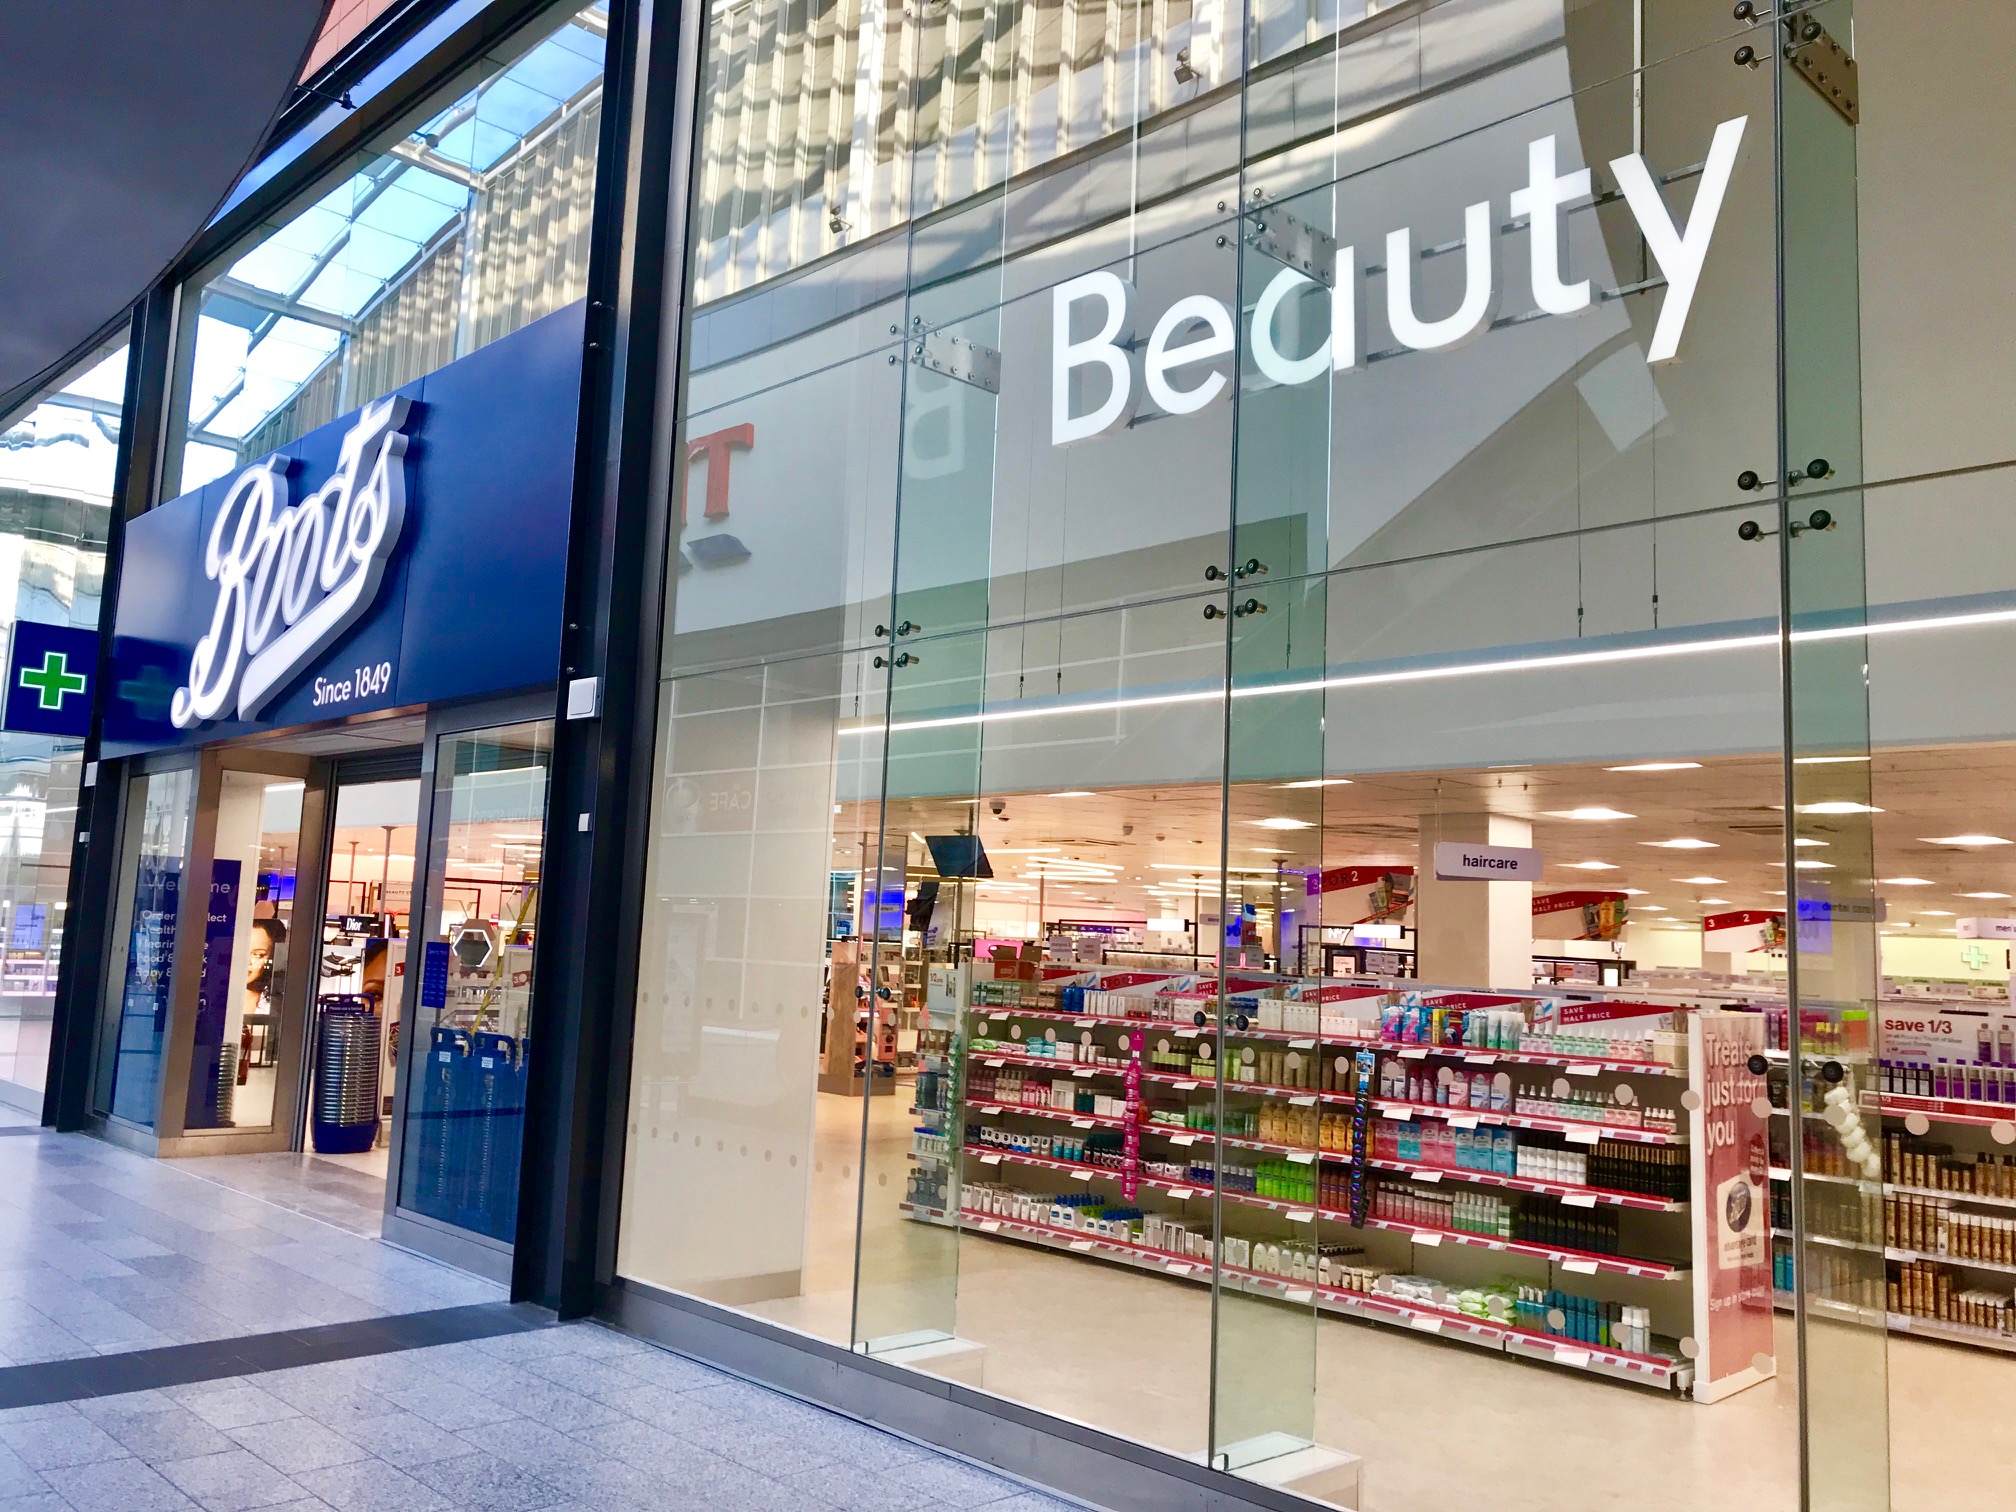 Boots Marketplace had originally been poised to go live in spring 2023